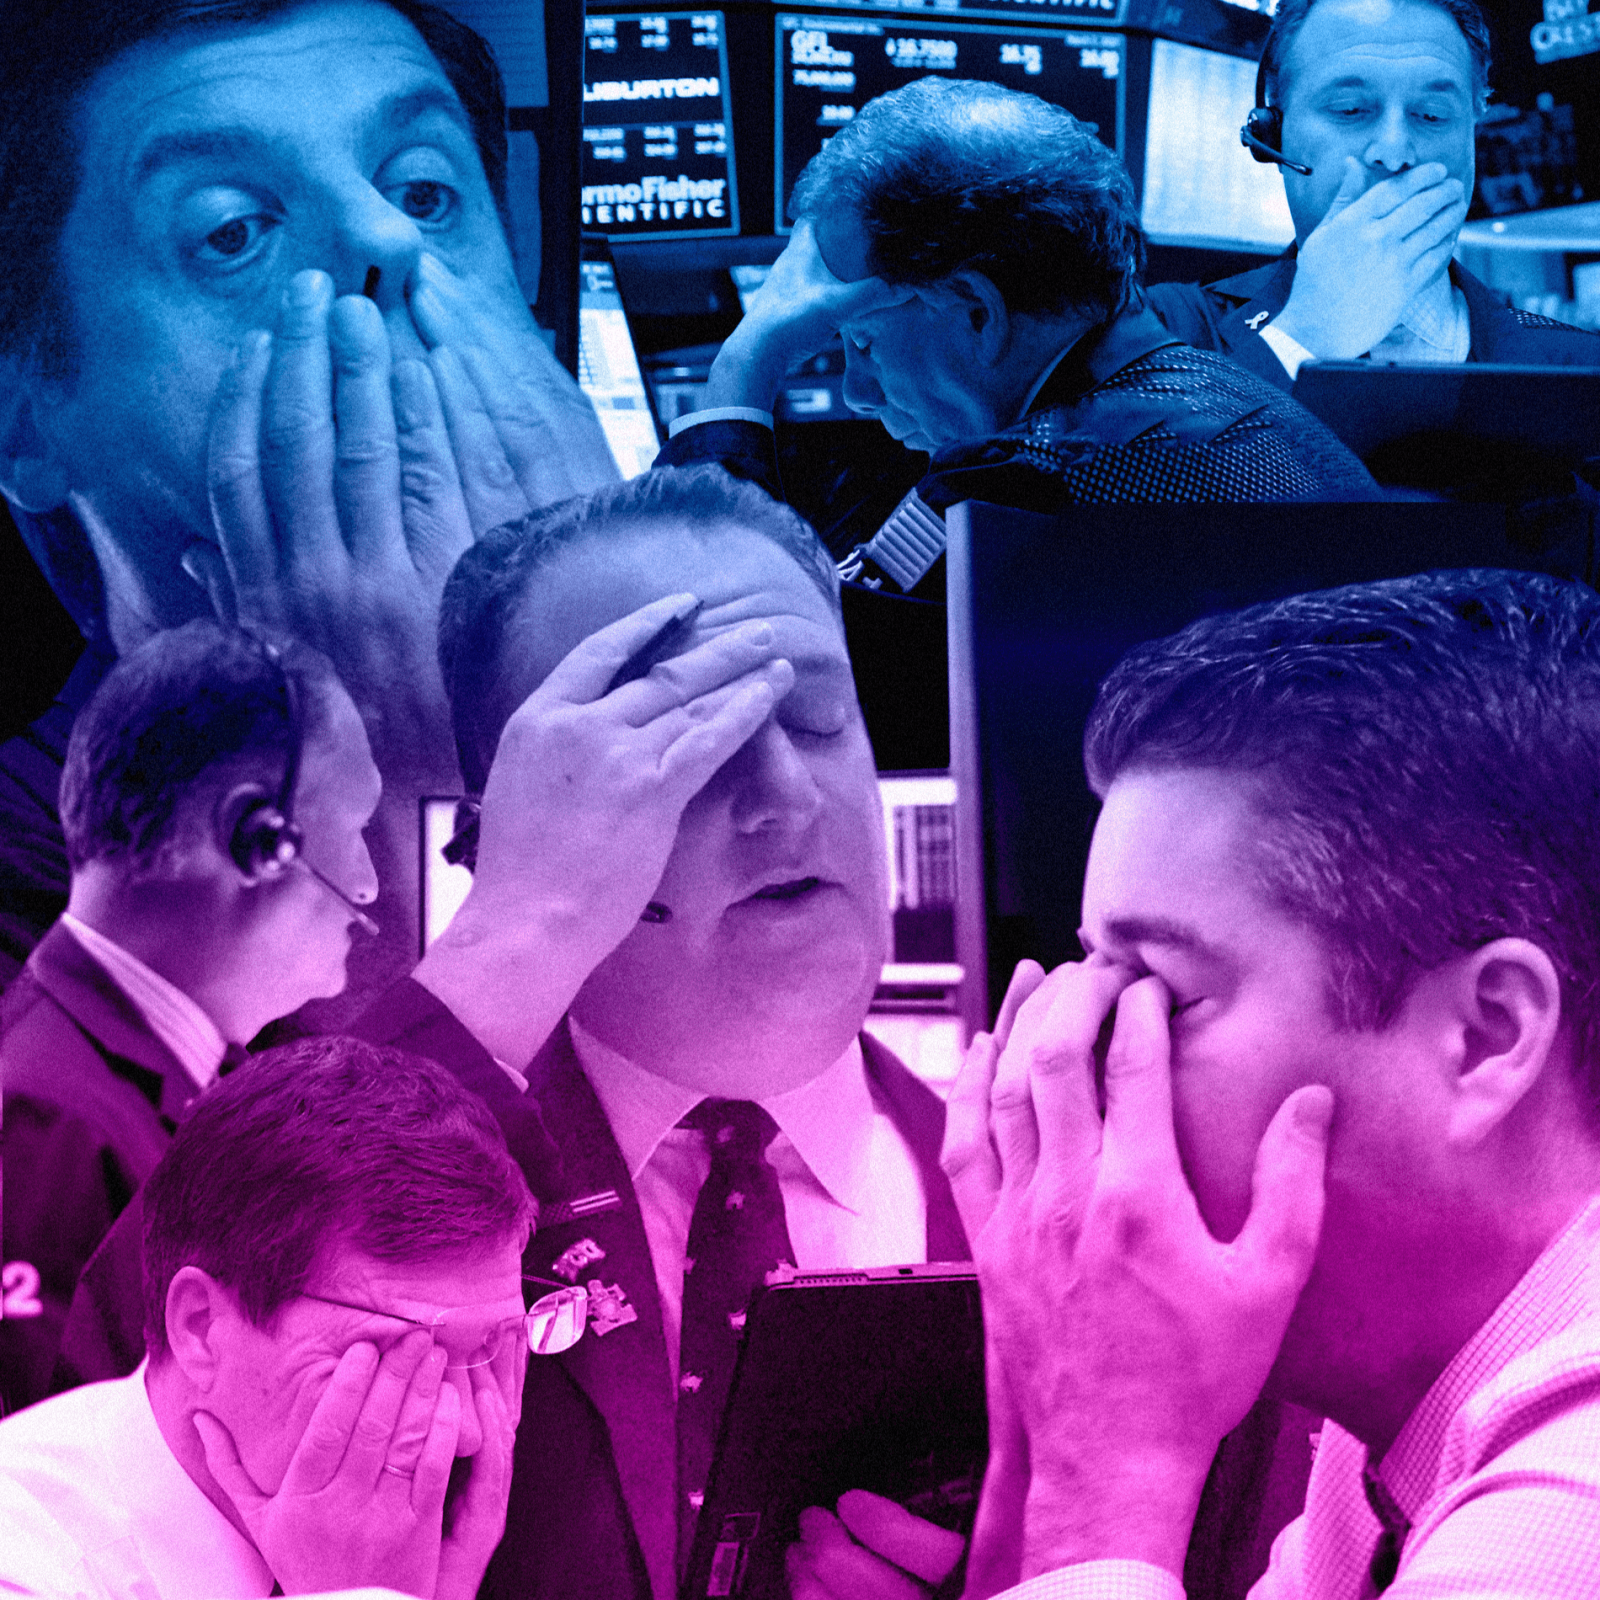 Whenever the market tumbles, as it did this week, you can bet on one thing: news outlets start buying stock photos of anxious (probably male, middle-aged) traders to post with their stories. We investigated what these folks are actually concerned about.